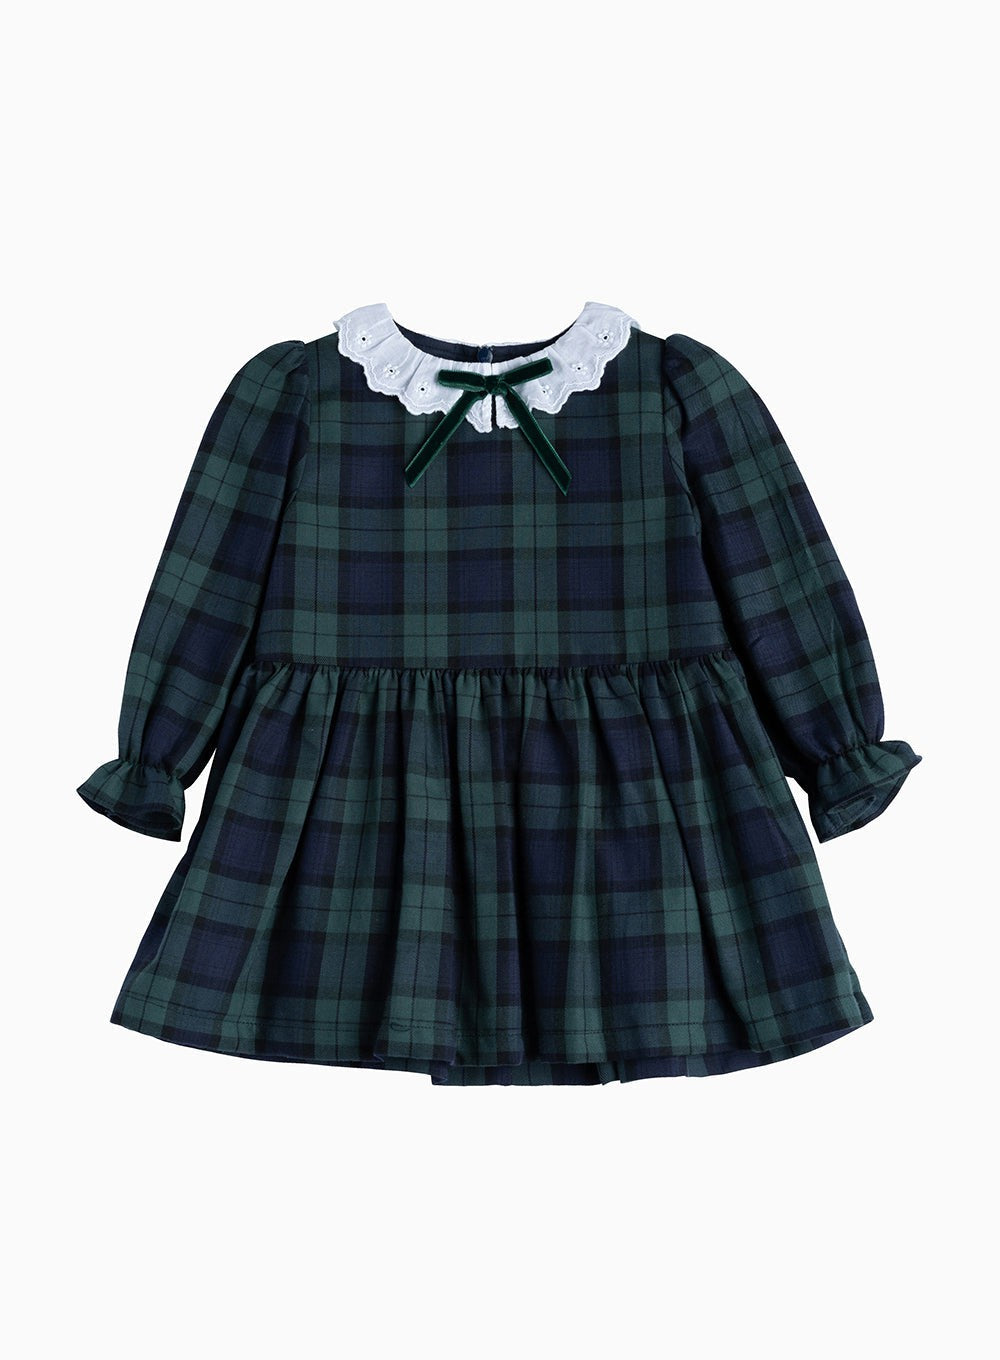 Confiture Baby Girls' Tabitha Willow Plaid Dress Navy Plaid